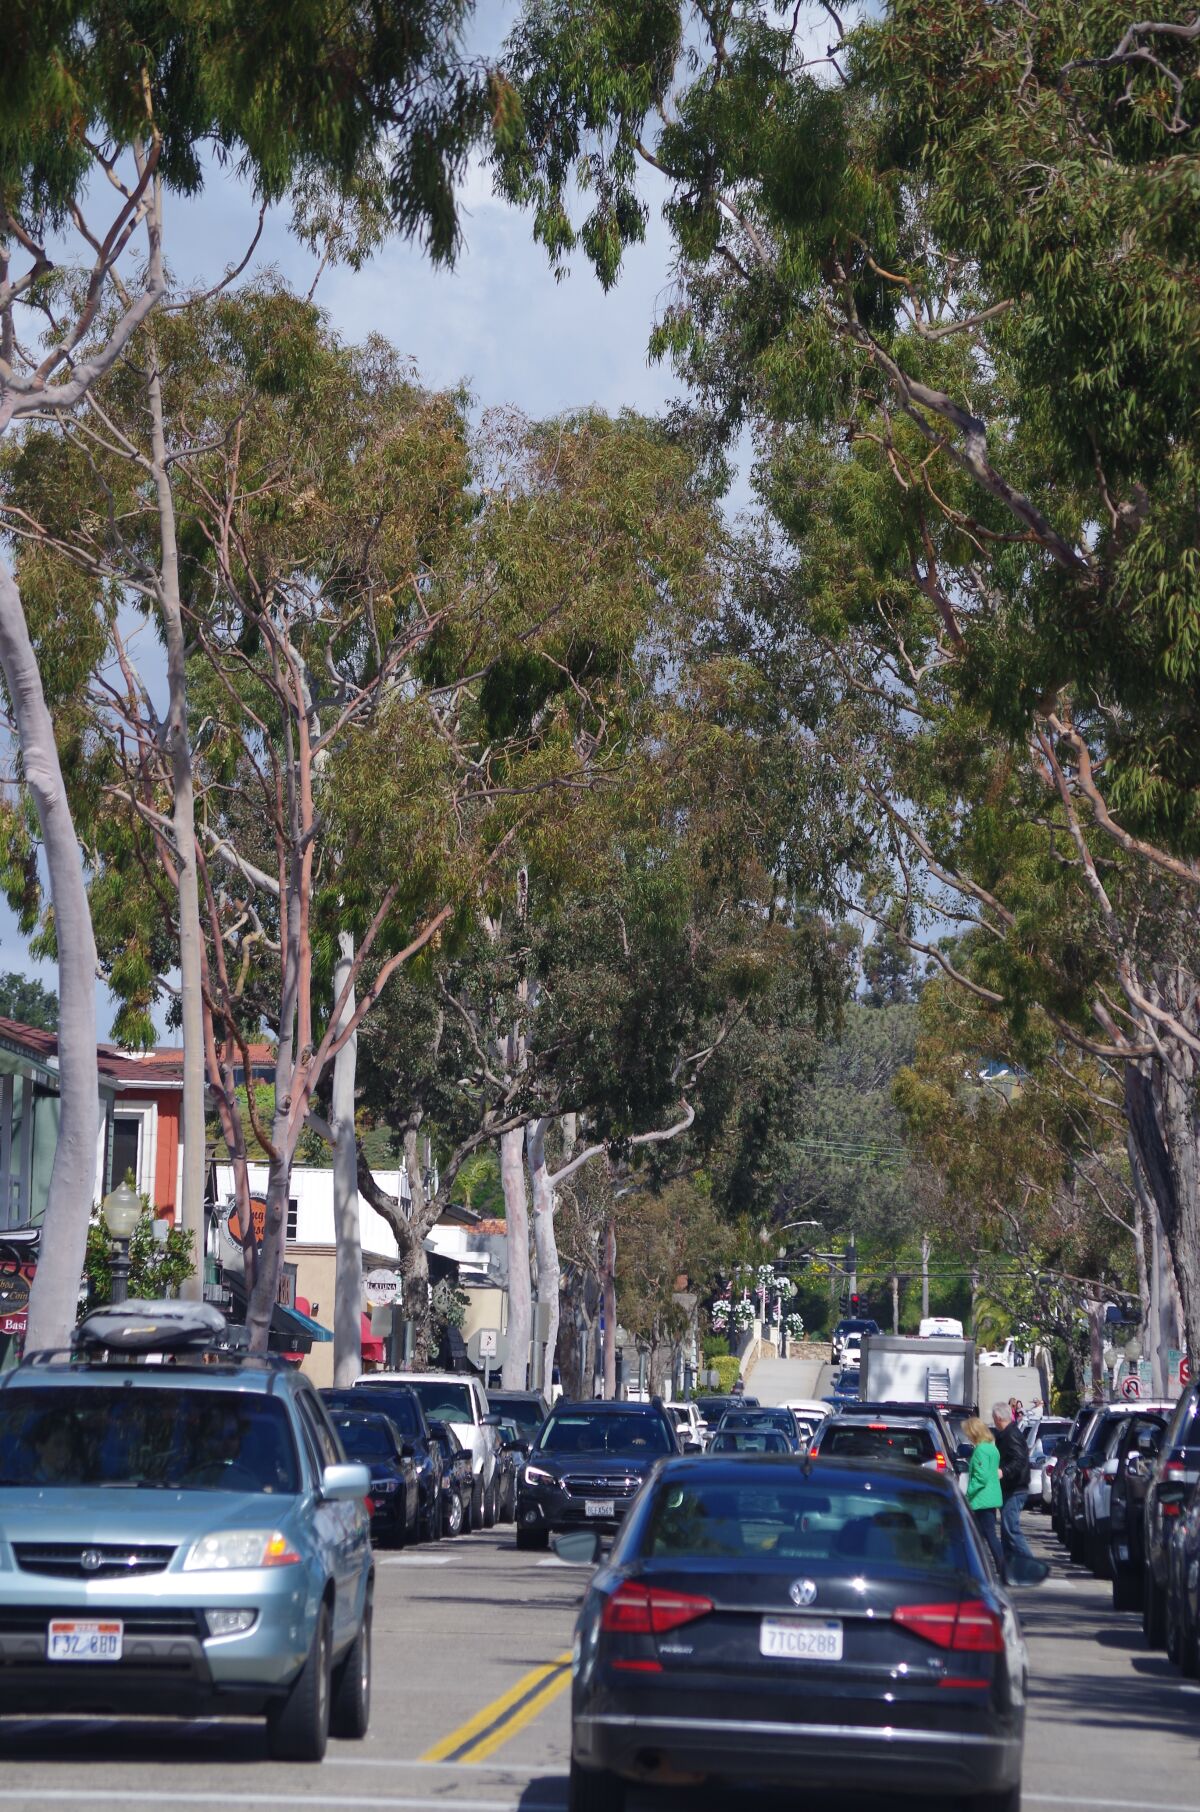 “Marine Avenue is our driveway,” said Jim Moloney, a member of the Balboa Island Preservation Assn. “There are 1,800 homes on the island. There are 4,400 residents. And everybody who comes home ... sees those trees.”